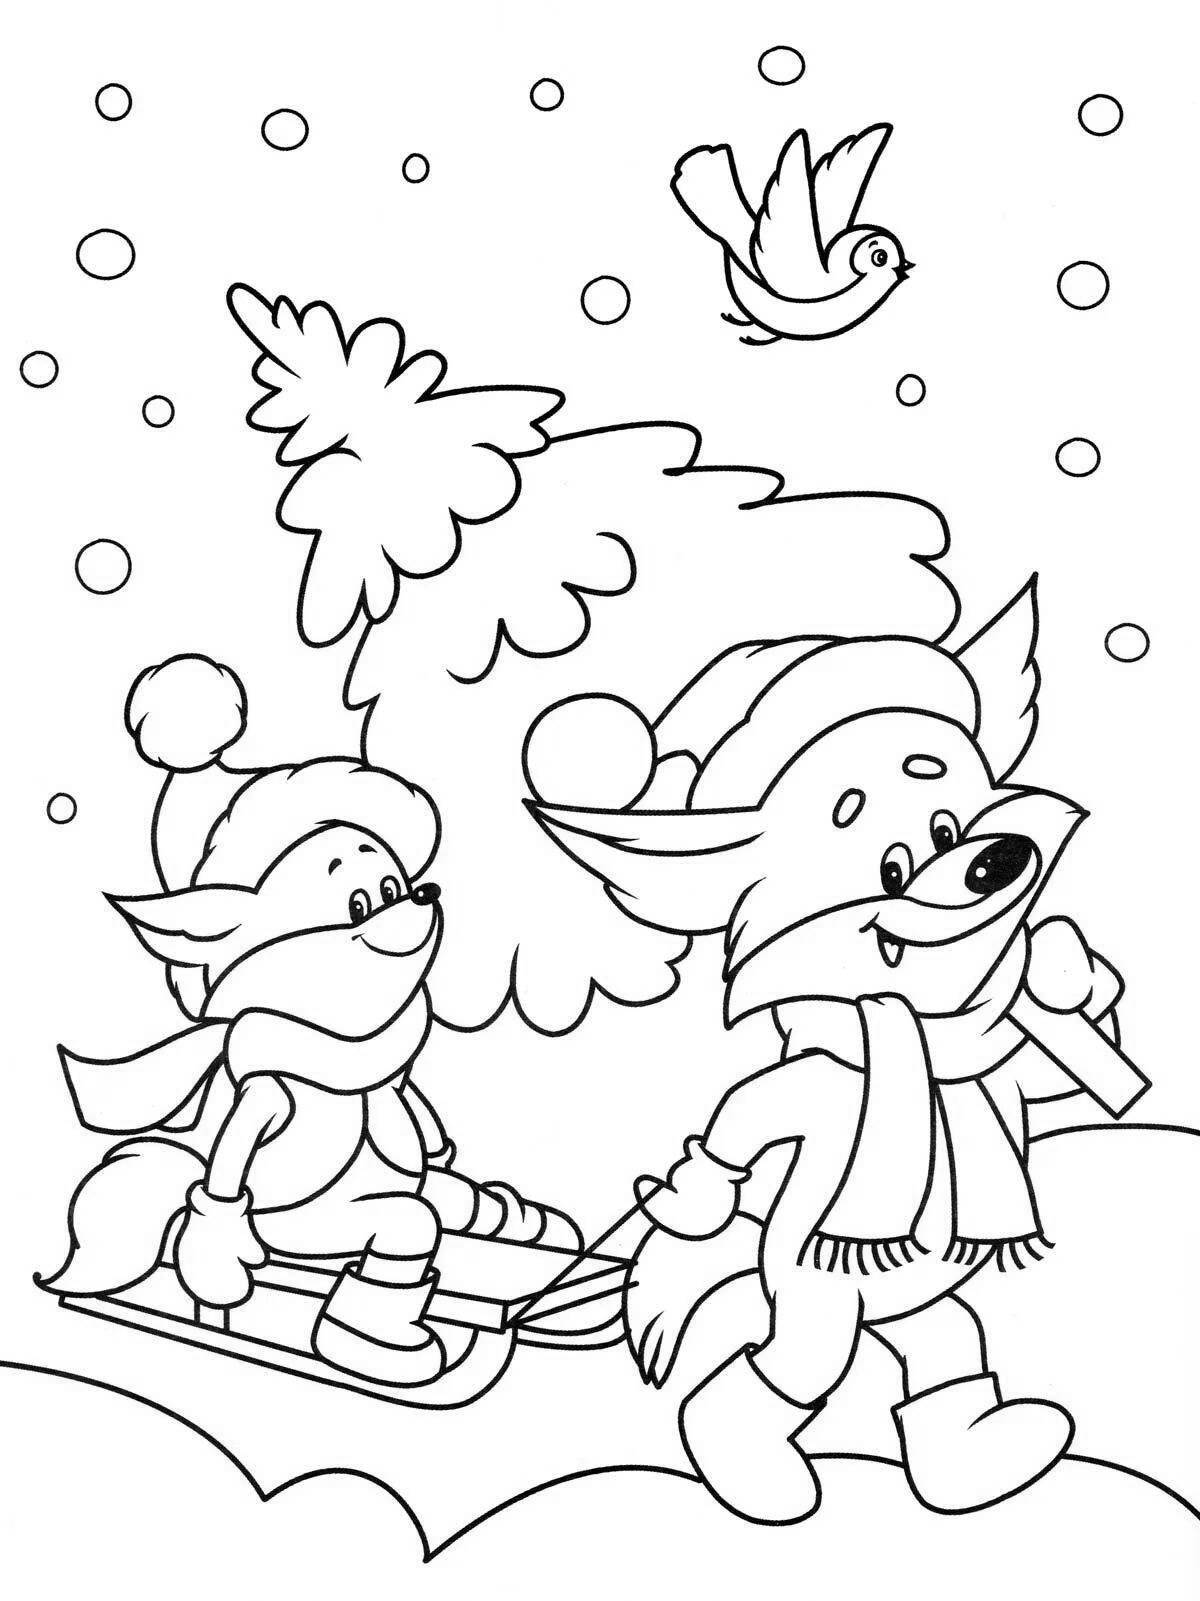 Beautiful winter coloring for children 6-7 years old